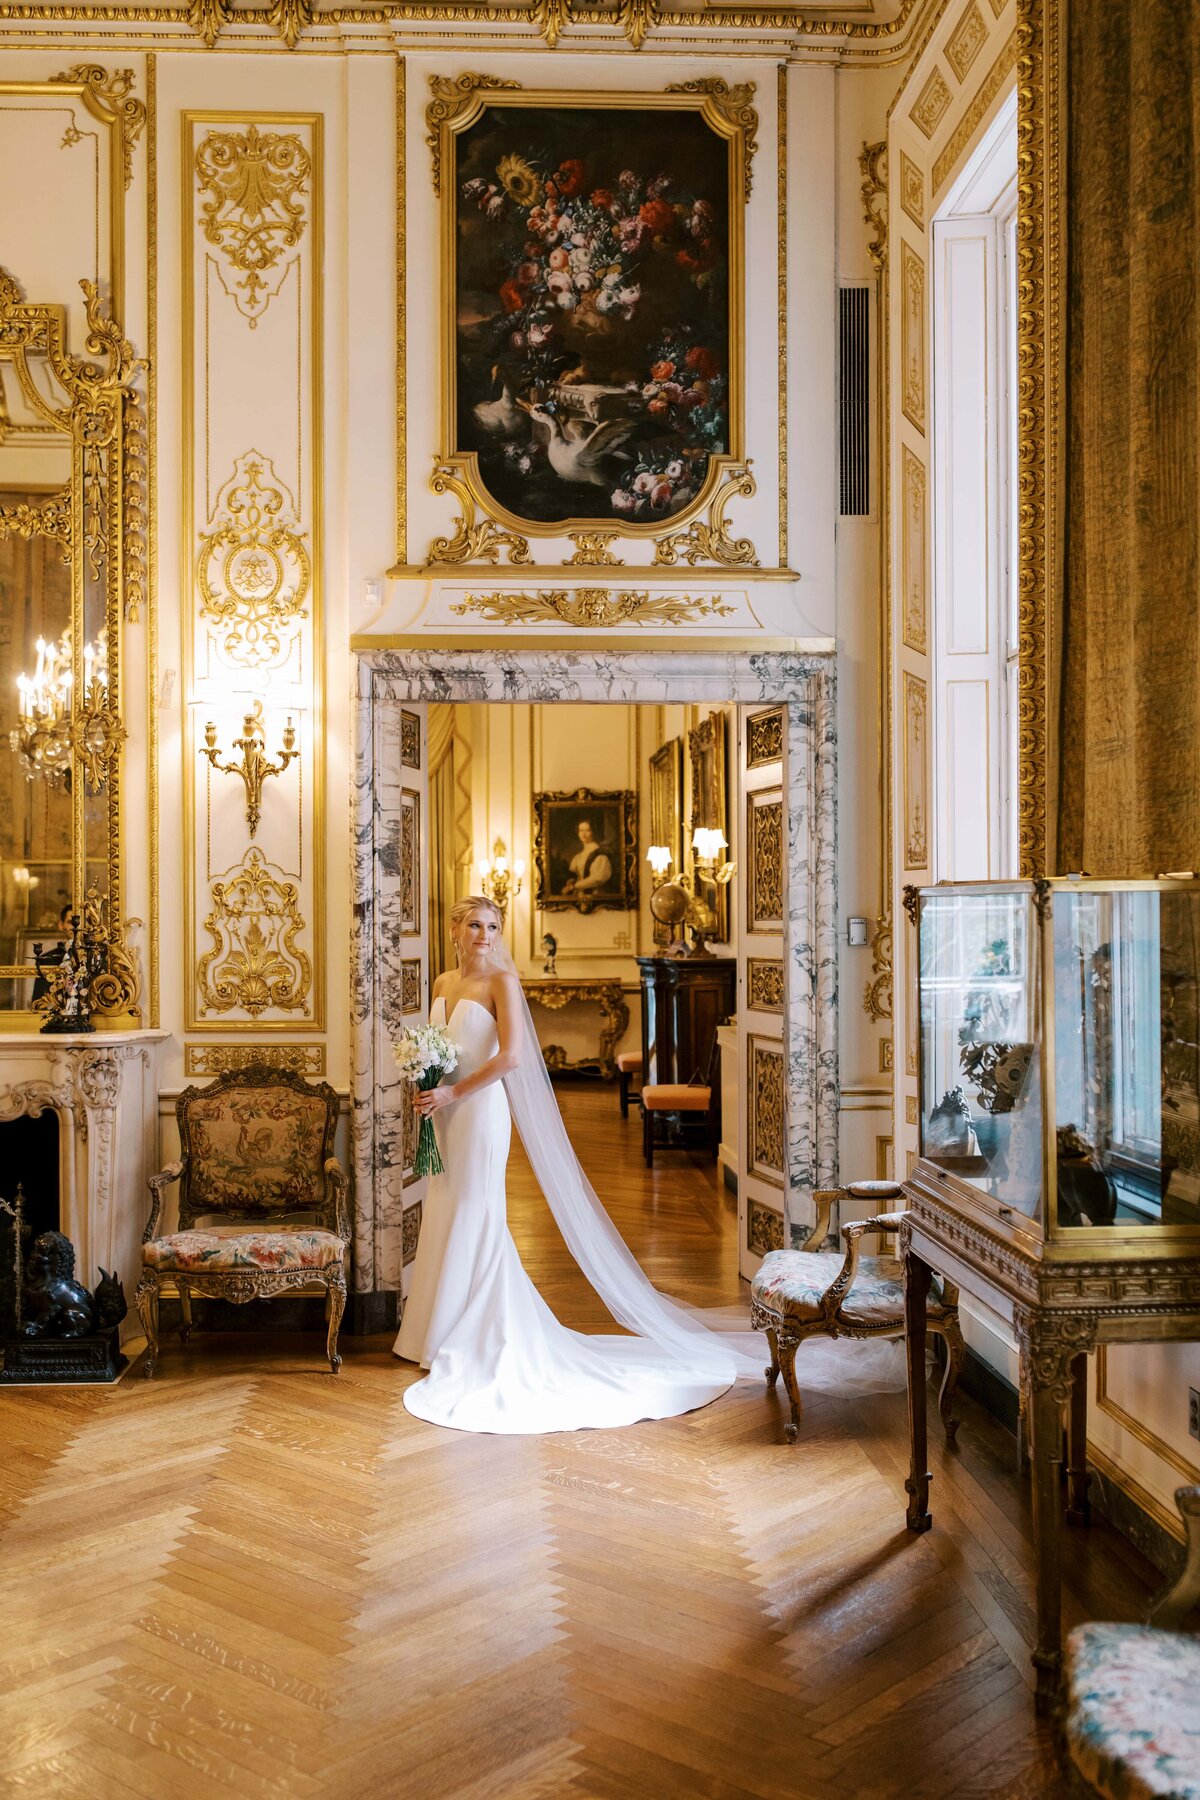 A fair haired bride in a white wedding gown holding a bouquet of white flowers leaning against a wall in an ornately decorated gold room in the Anderson House in Washington D.C.